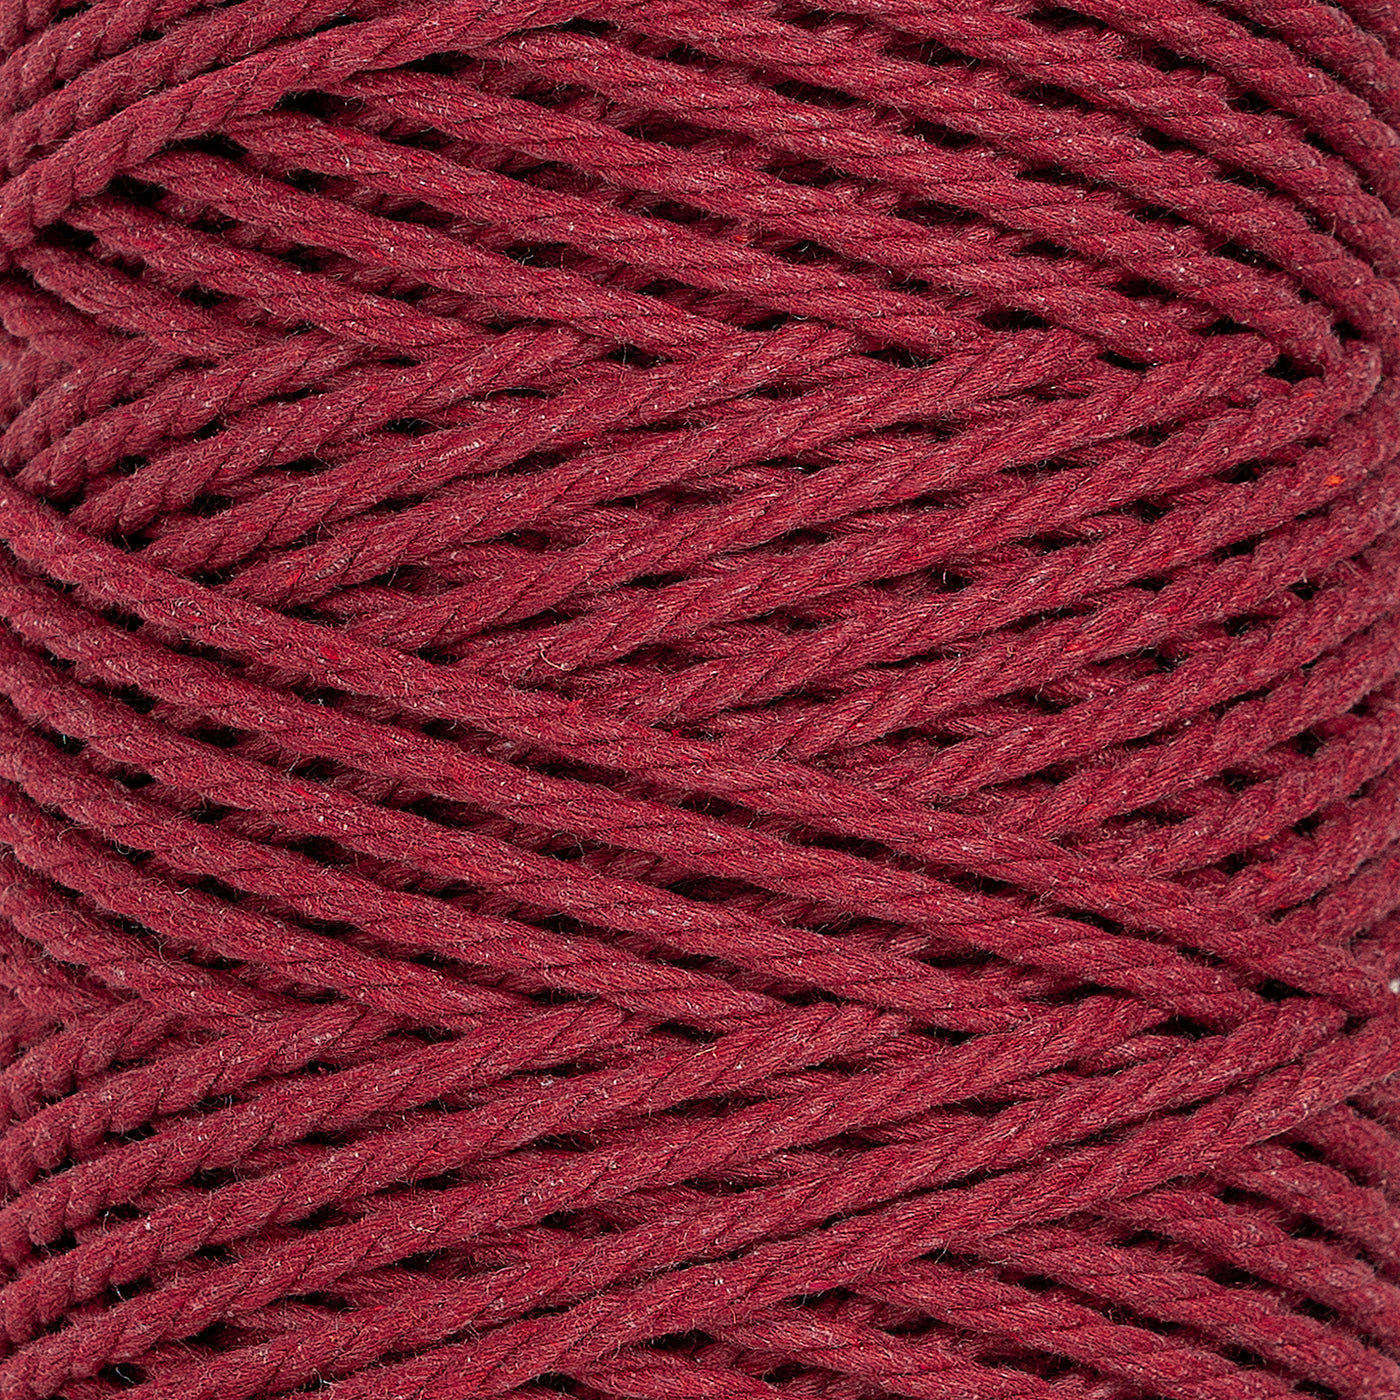 COTTON ROPE ZERO WASTE 3 MM - 3 PLY - BERRY RED COLOR